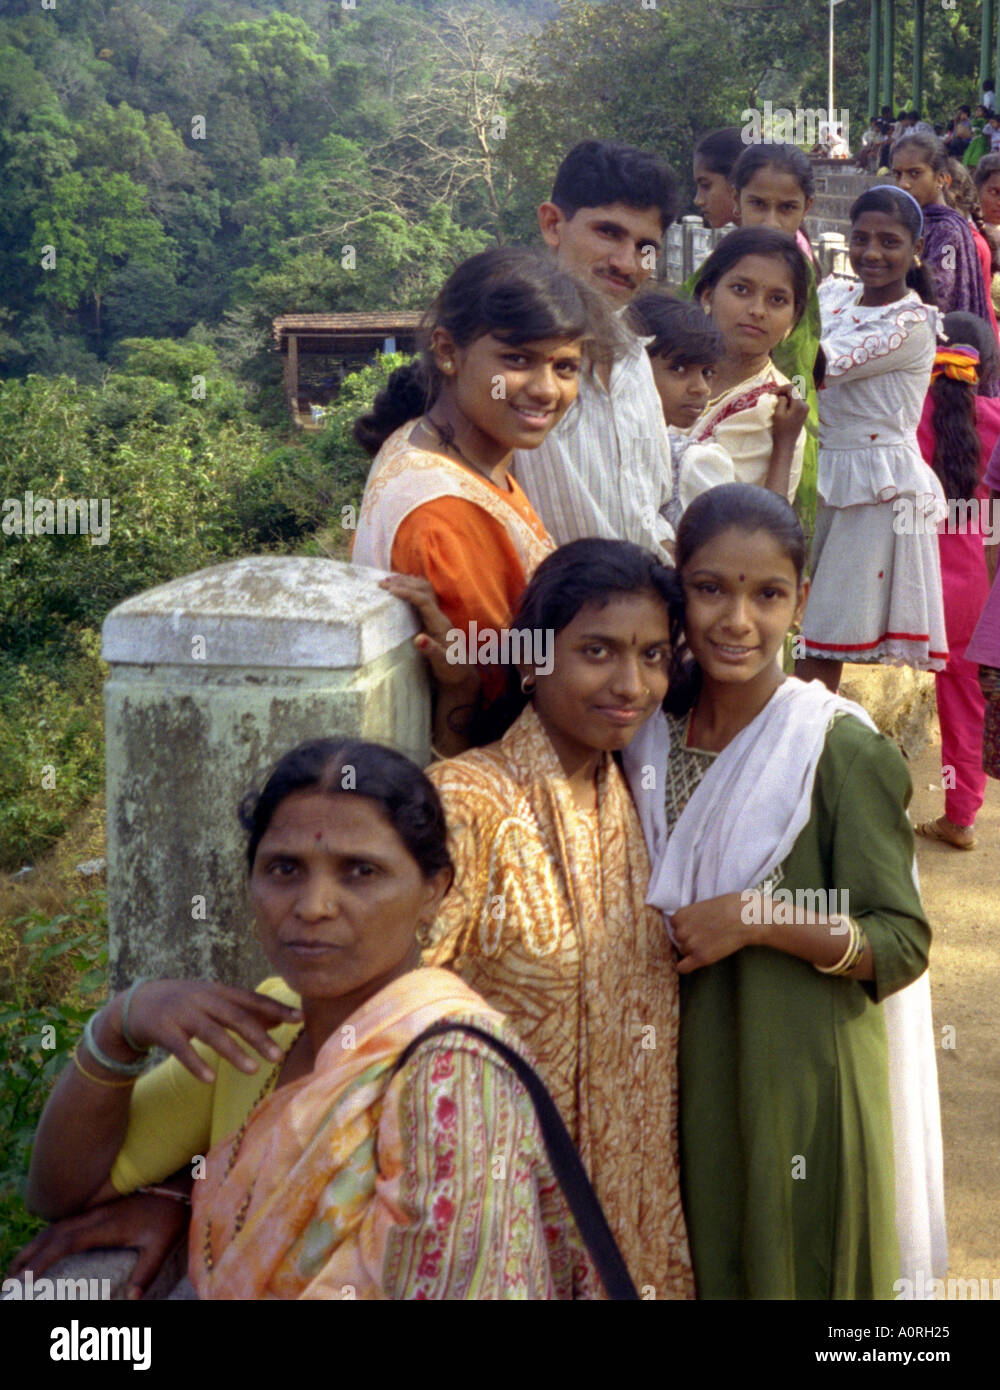 Group of women girls & man in colourful traditional clothing looking interested Jog Falls Karnataka India South Asia Stock Photo